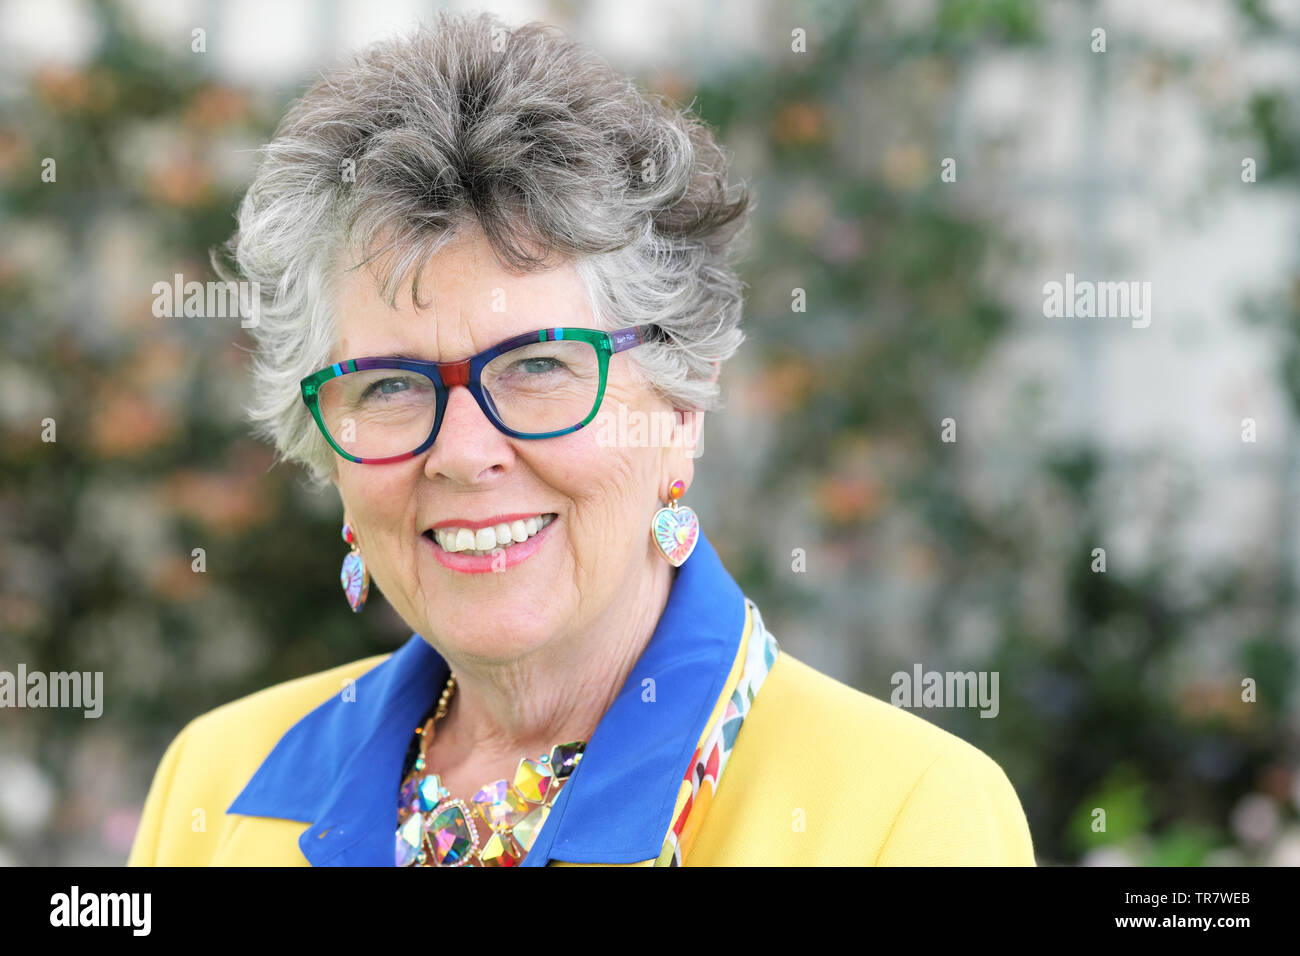 Hay Festival, Hay on Wye, Powys, Wales, UK - Thursday 30th May 2019 - Prue Leith author and cooking presenter at the Hay Festival to talk about her fiction and food books. Photo Steven May / Alamy Live News Stock Photo